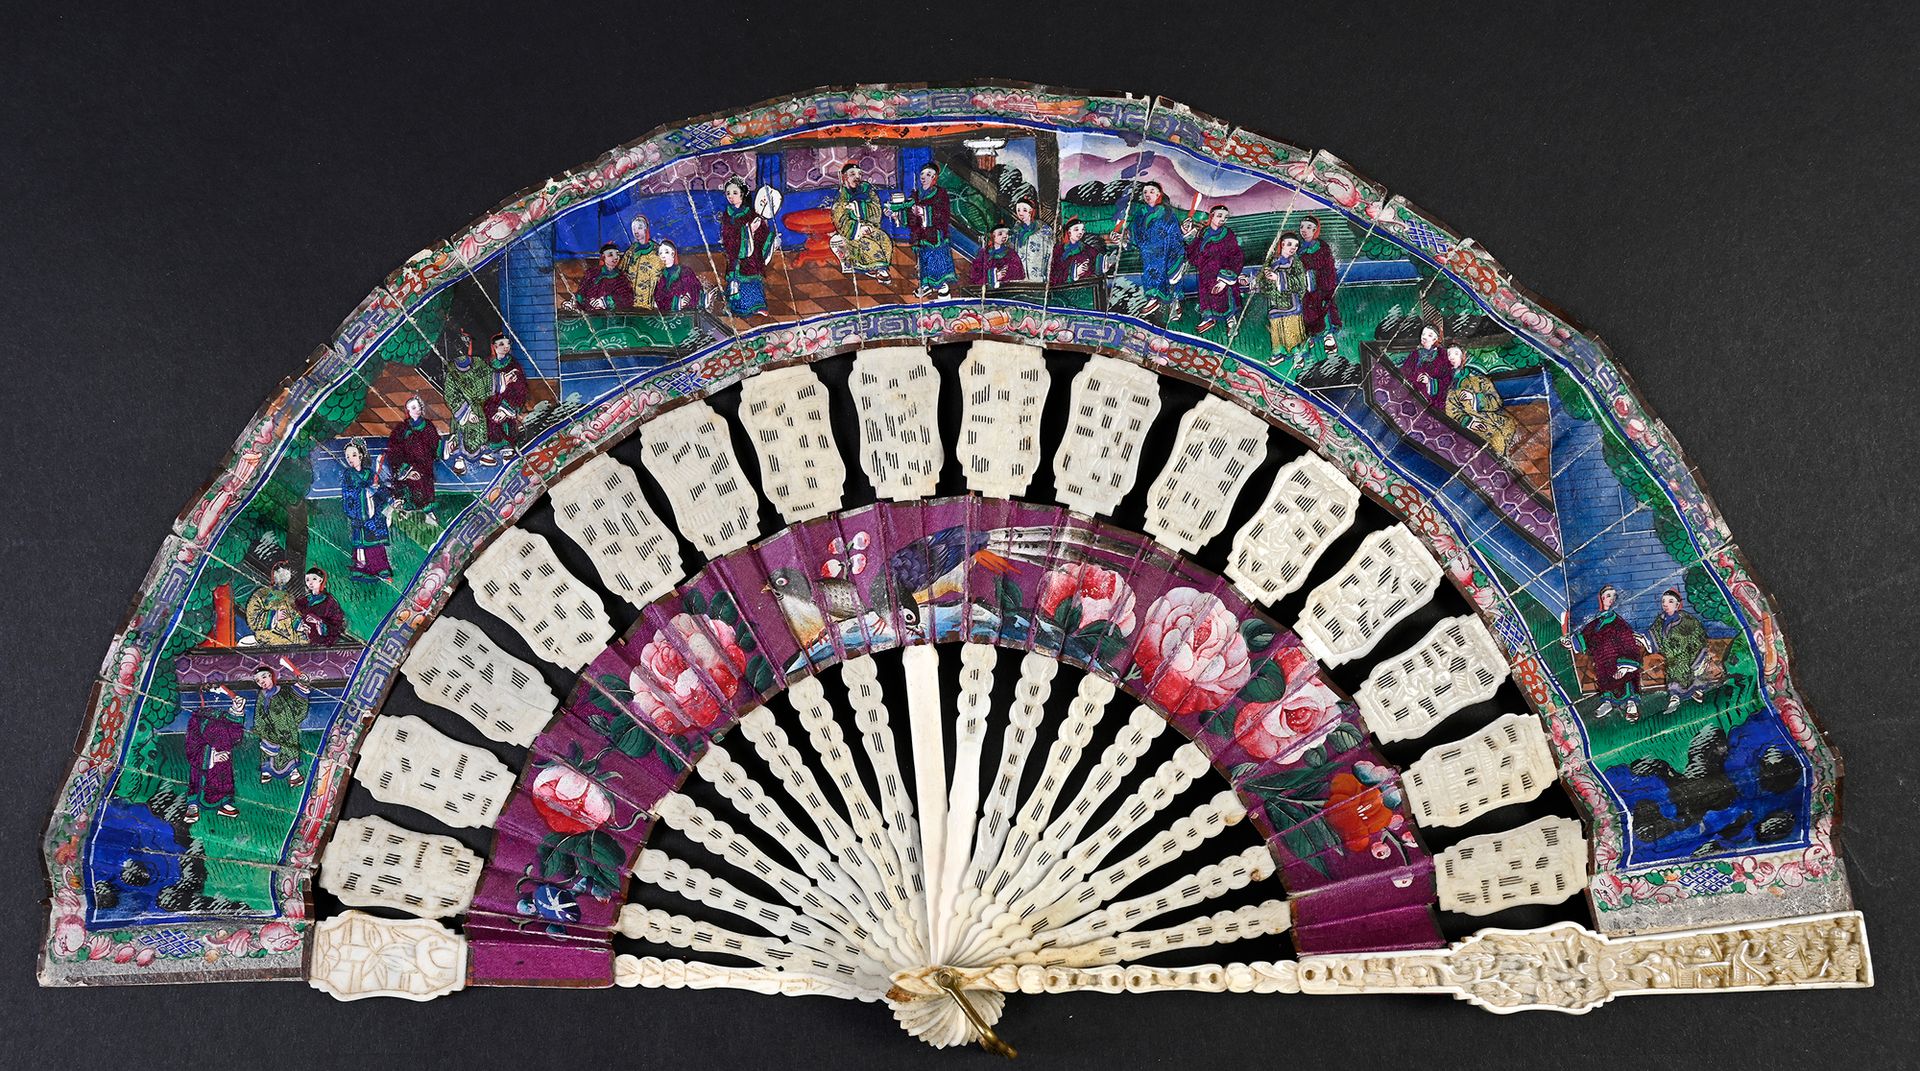 Null Cabriolet, China, 19th century
Folded fan, called "cabriolet", composed of &hellip;